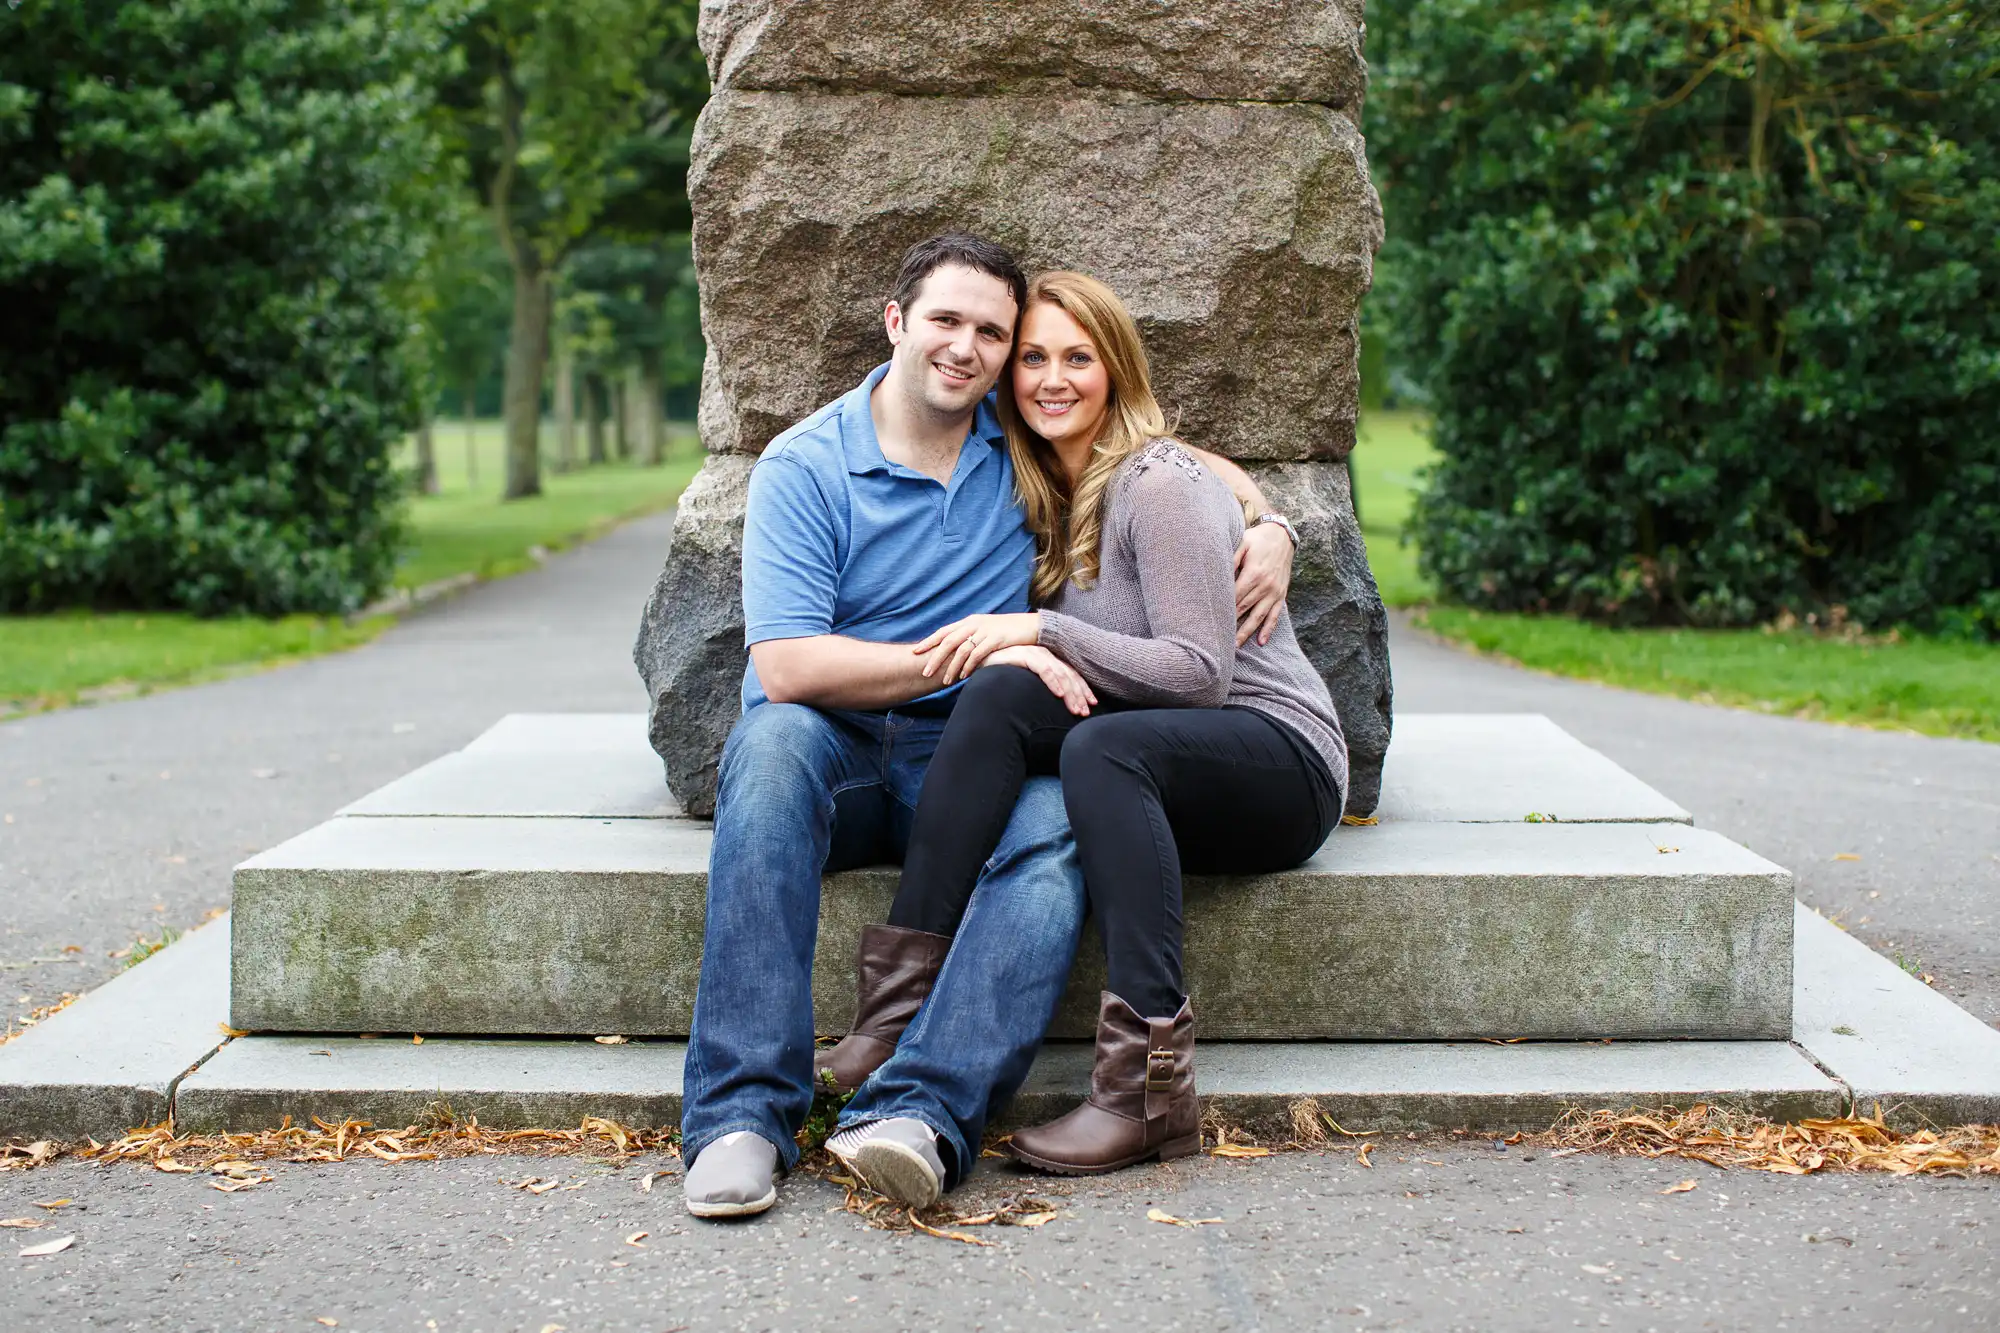 A couple smiling and sitting together on a concrete step by a stone column in a park, surrounded by trees.